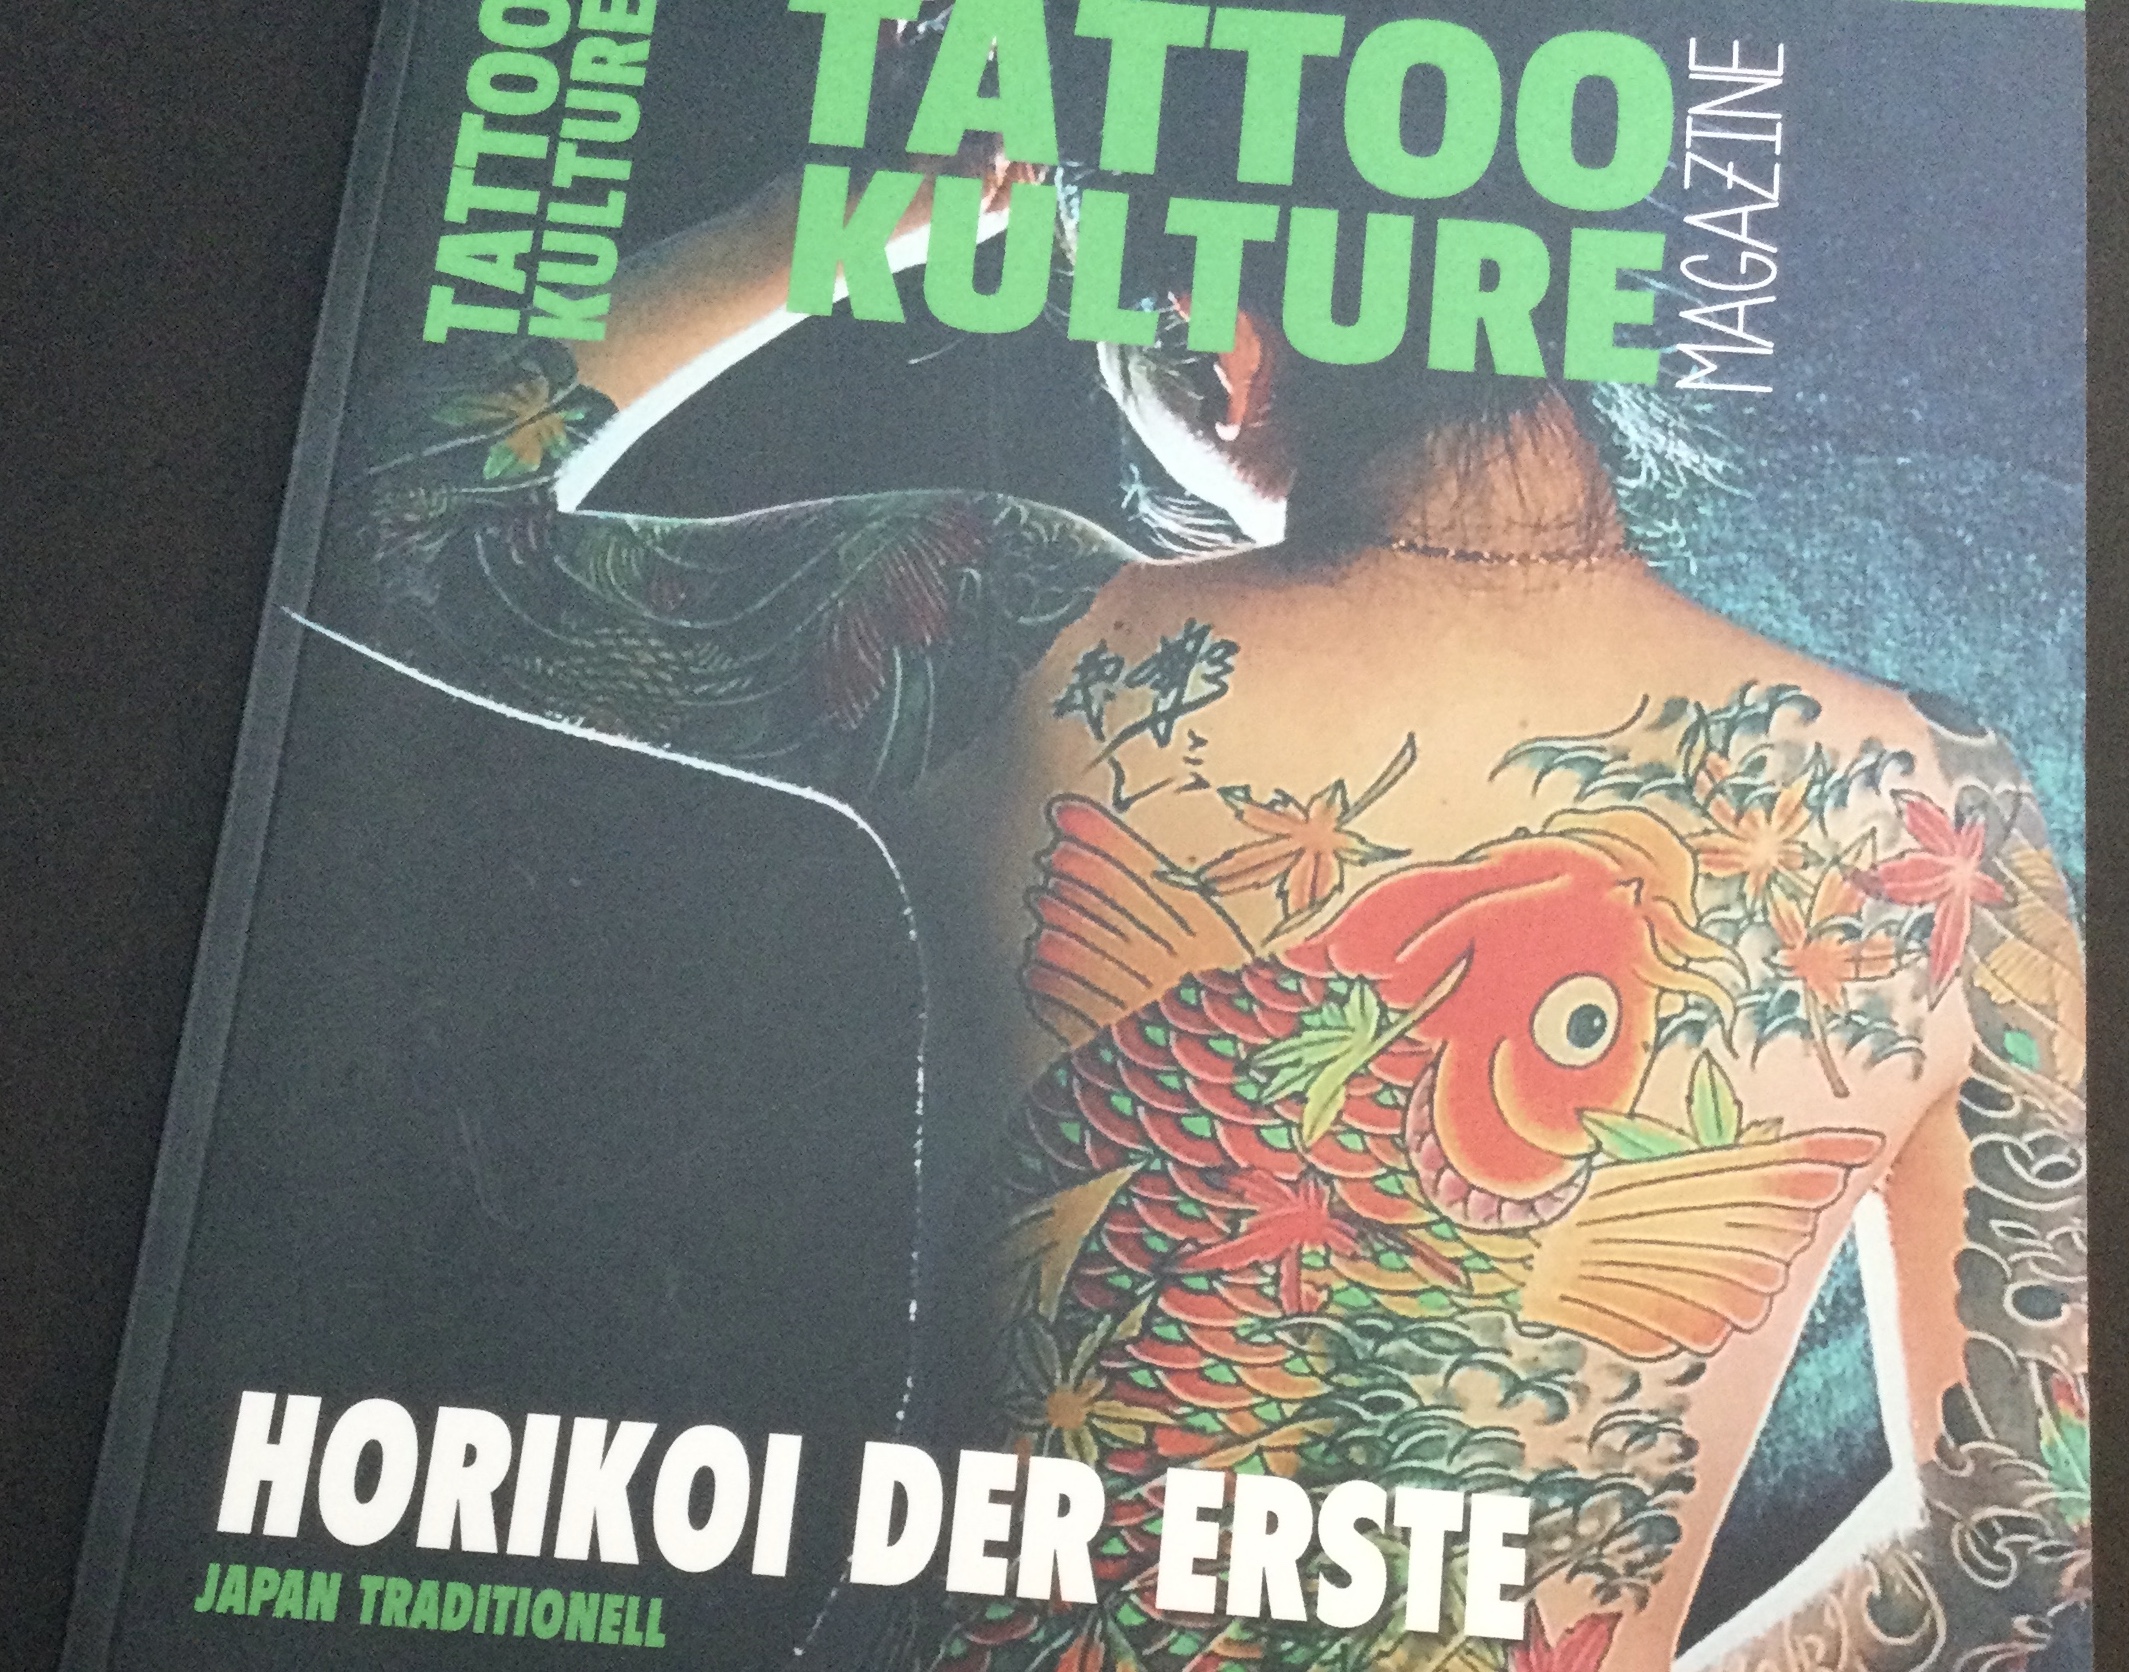 A woman’s back decorated with koi fish on magazine cover